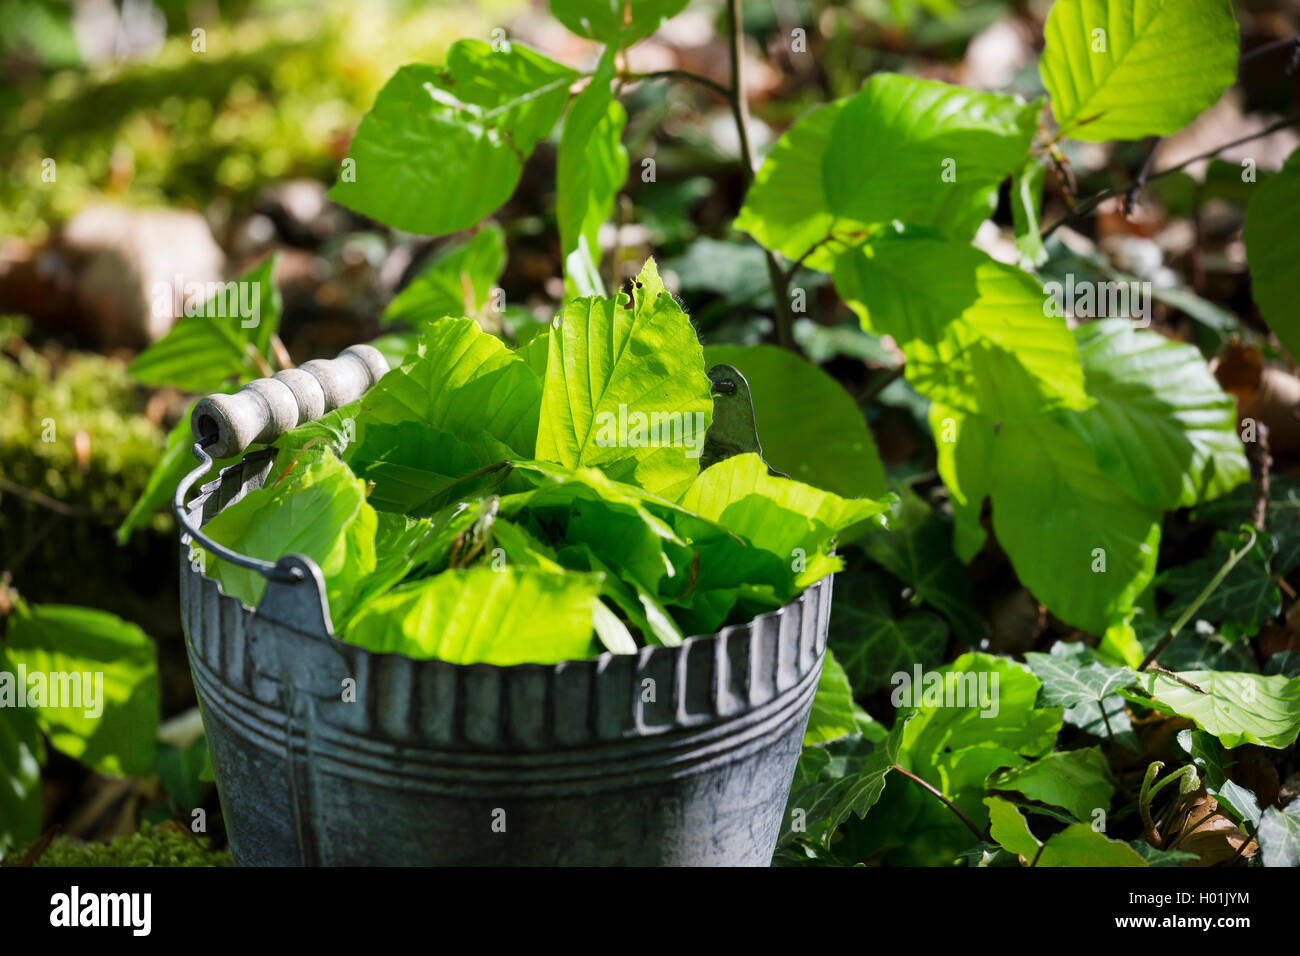 common beech (Fagus sylvatica), youngf leaves are collected in a bucket, Germany Stock Photo